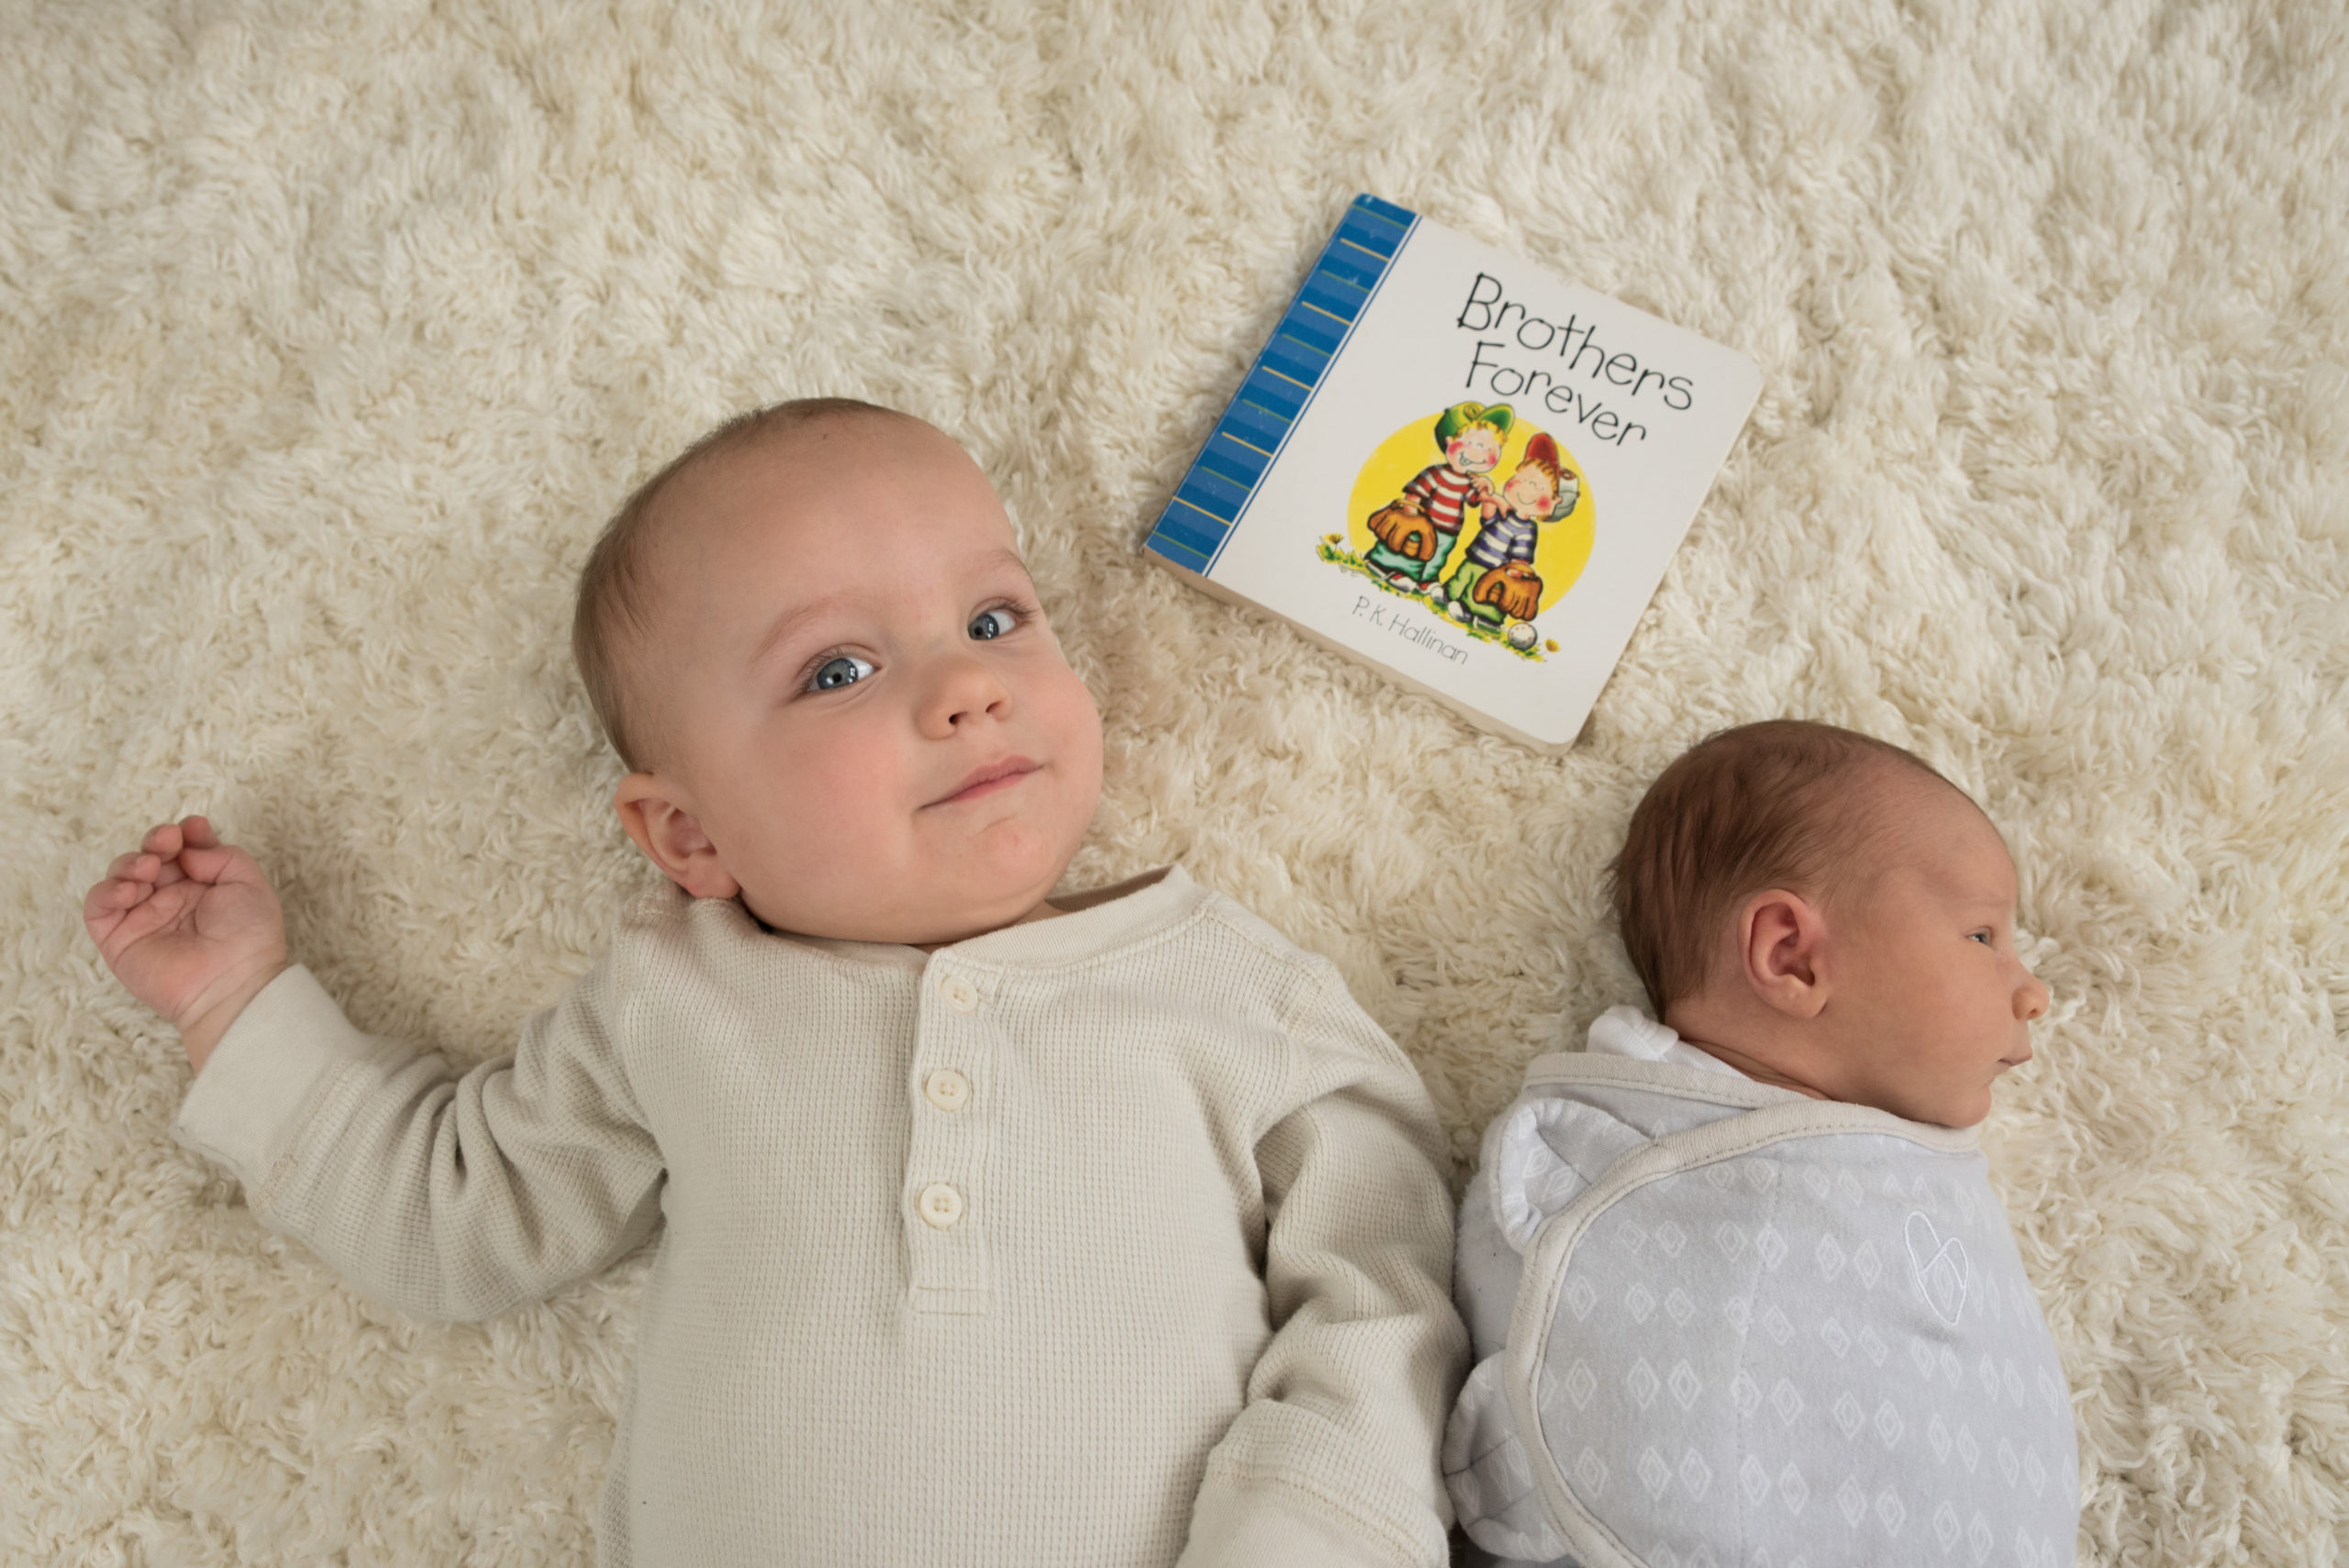 Brothers forever book with two boys after their parent's miscarriage